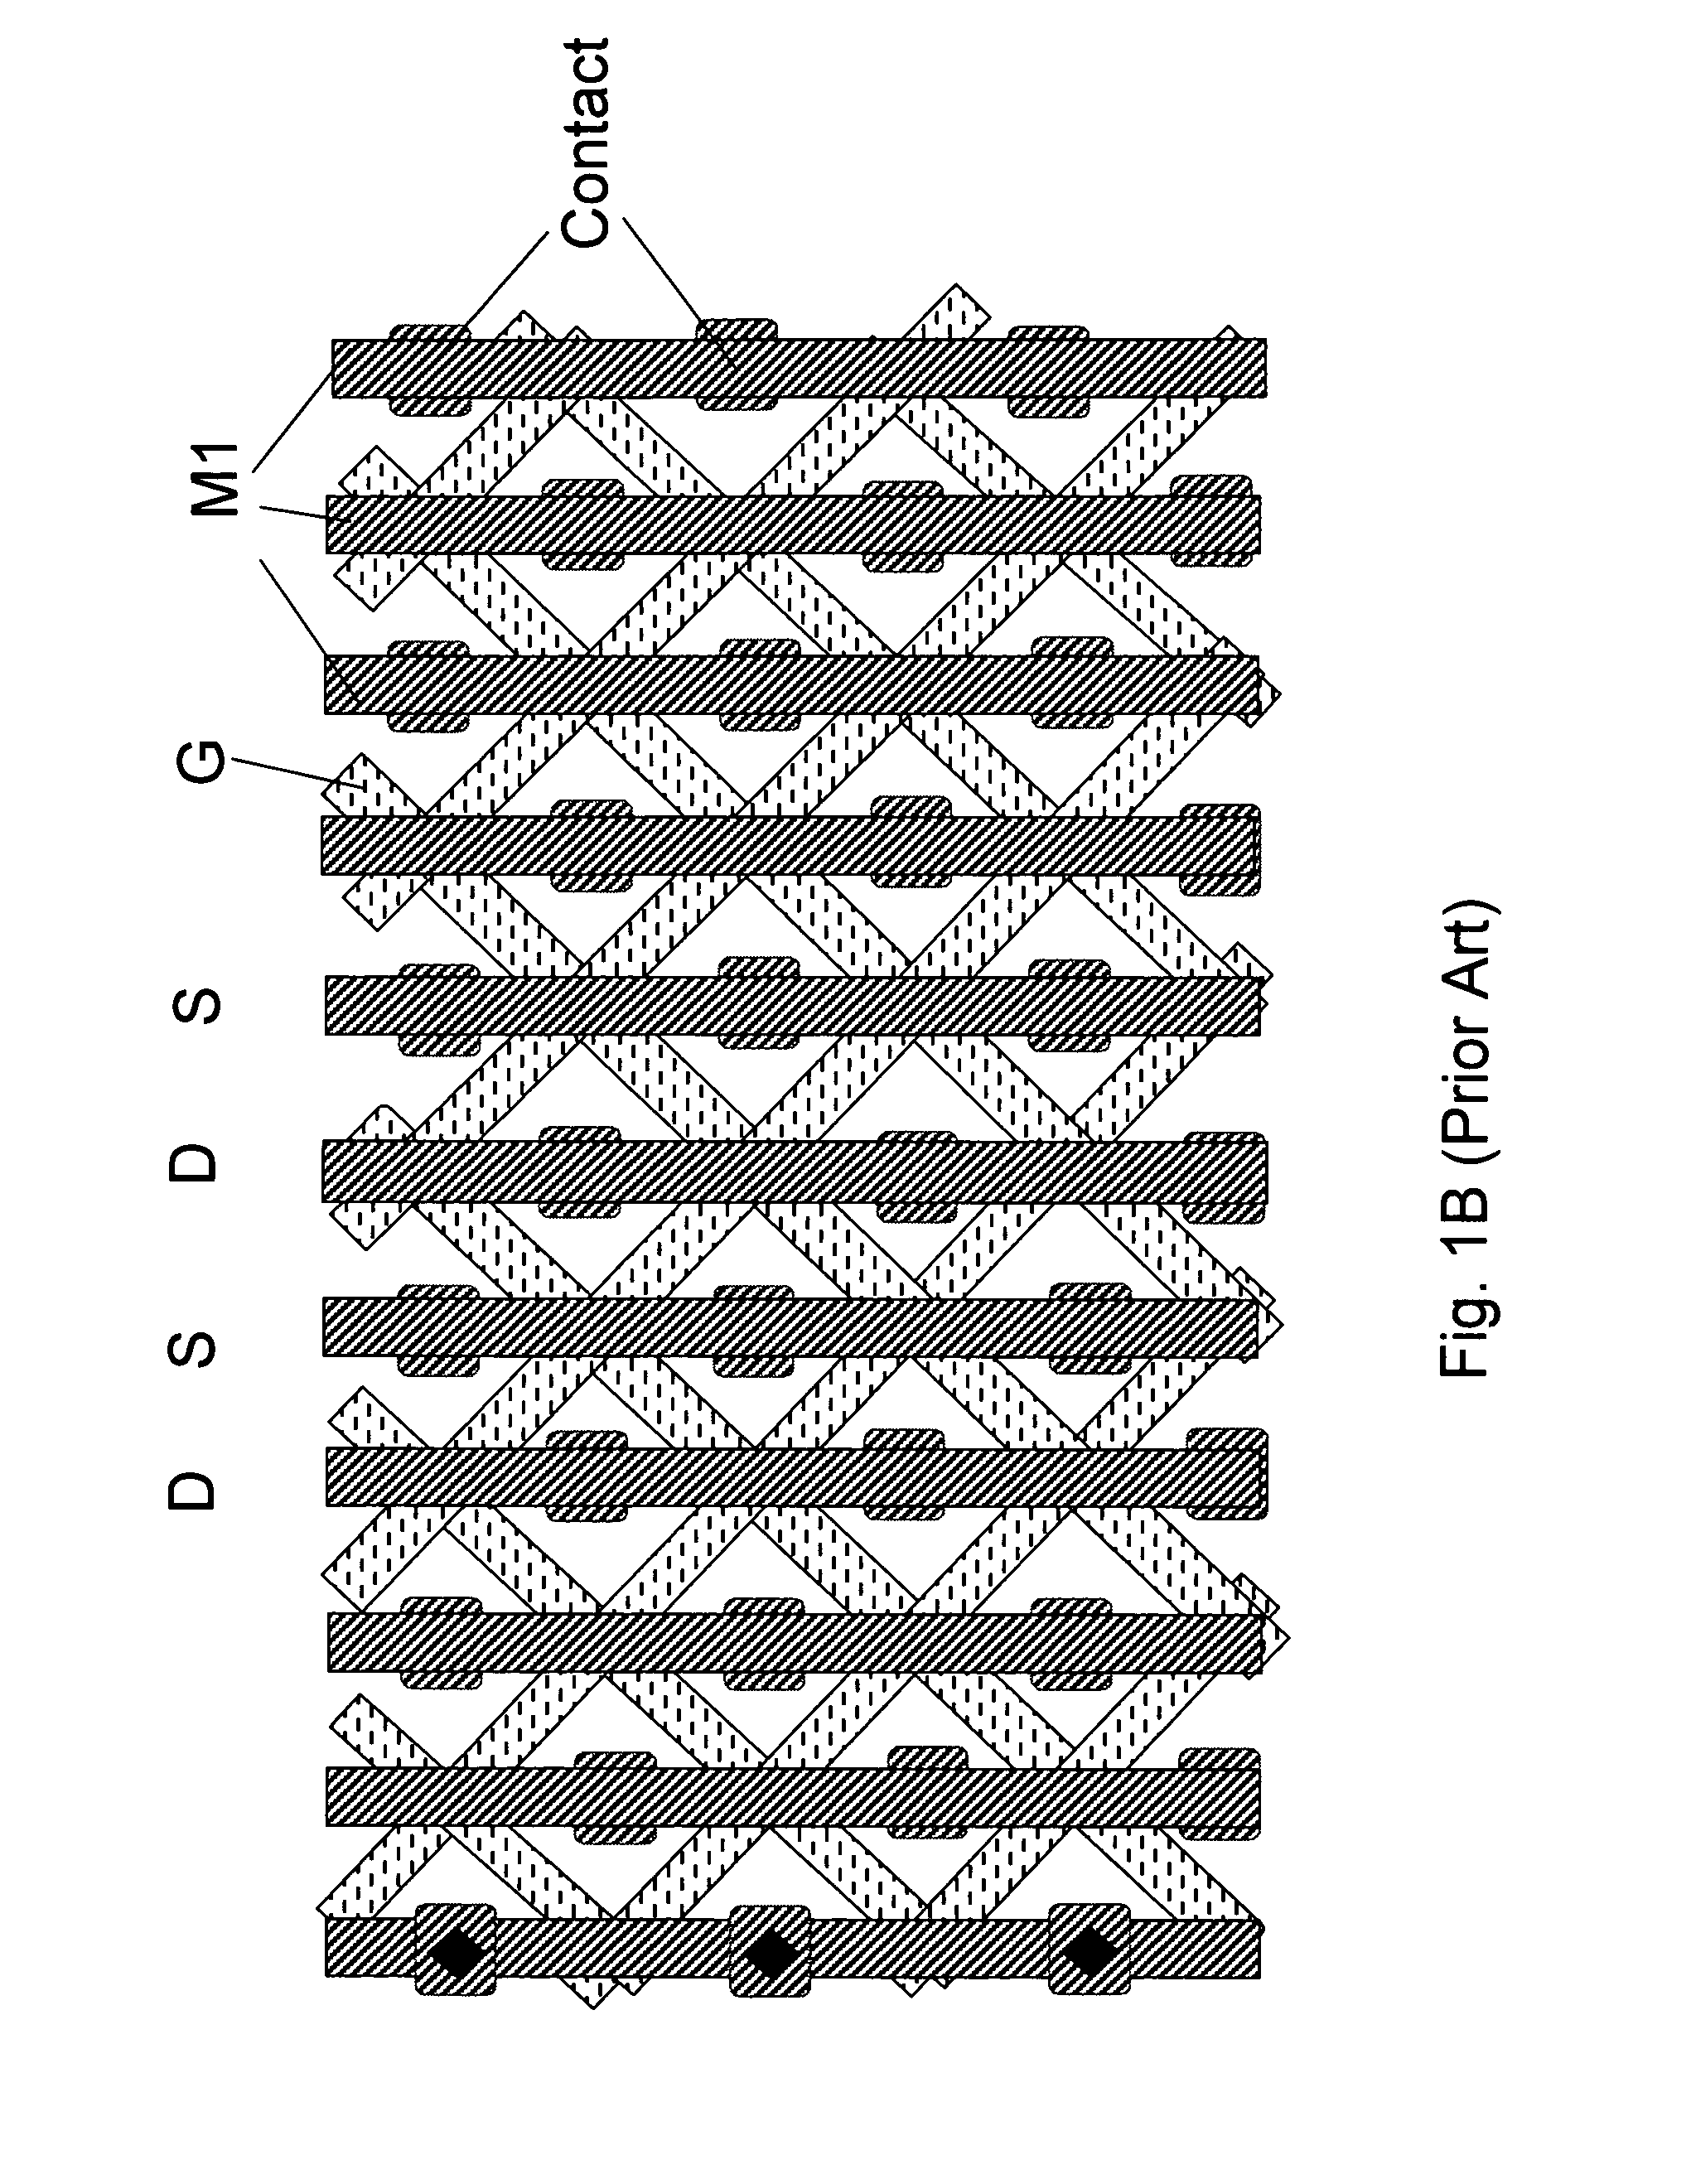 Closed cell configuration to increase channel density for sub-micron planar semiconductor power device